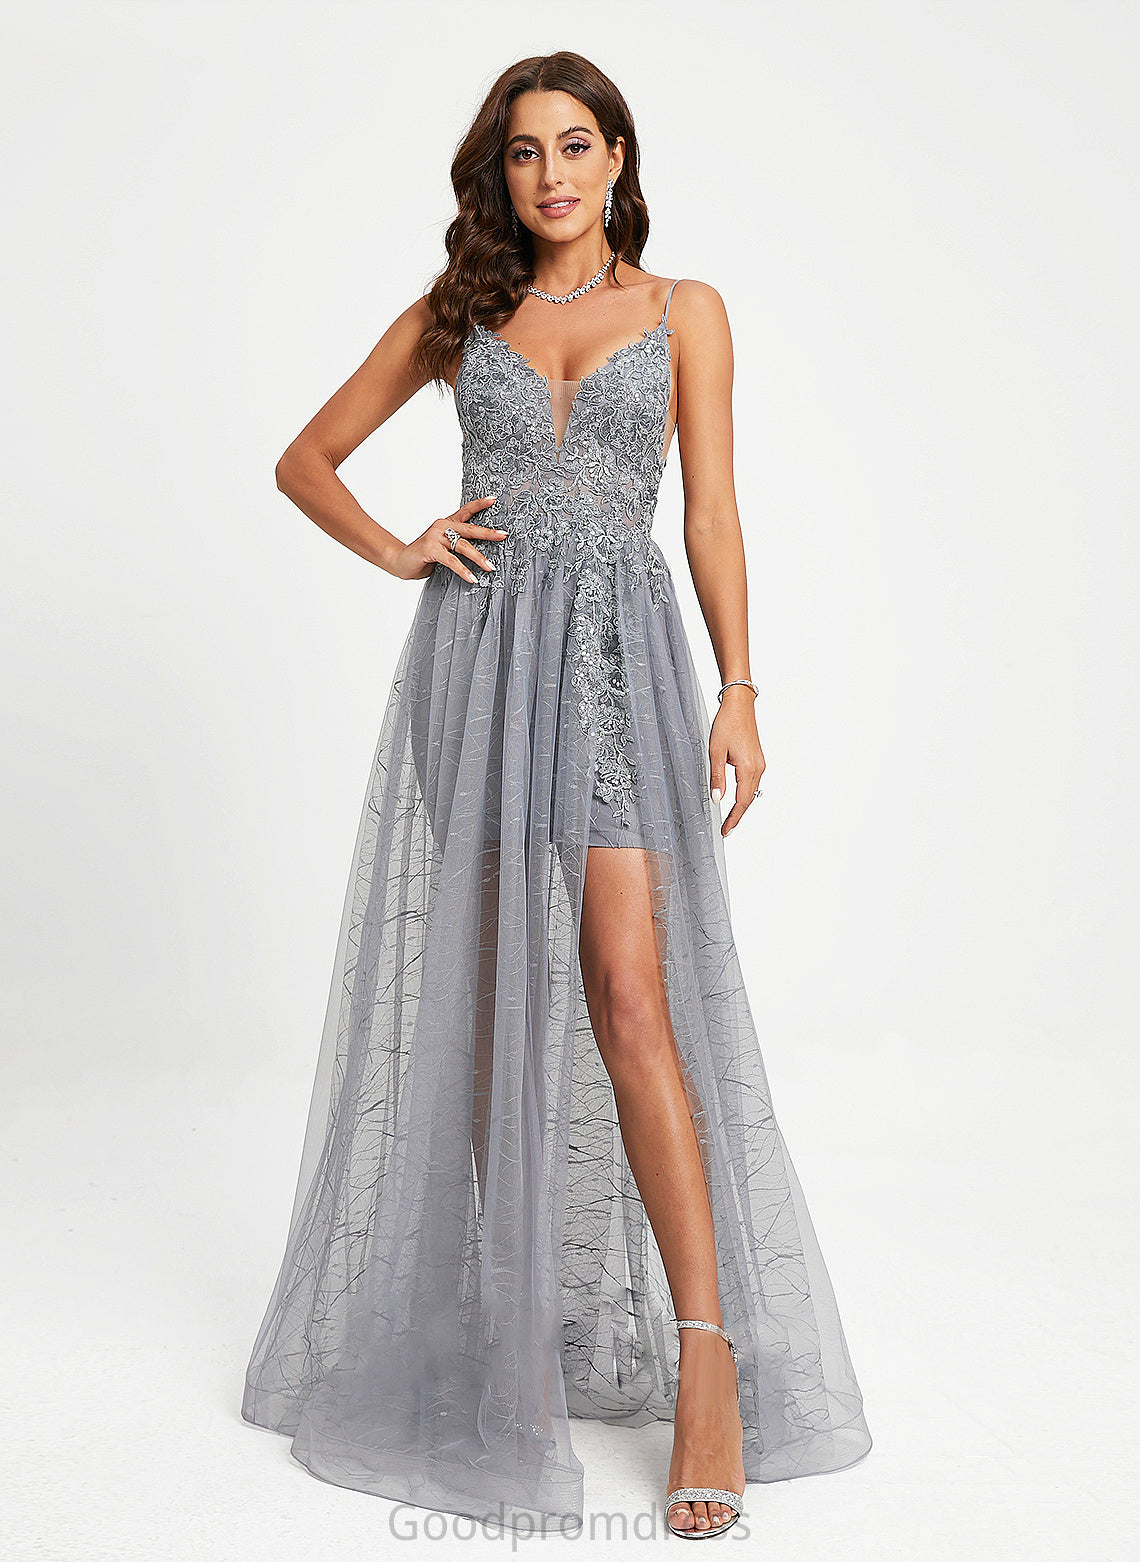 Lace Sequins With Cali Ball-Gown/Princess Floor-Length Prom Dresses Tulle V-neck